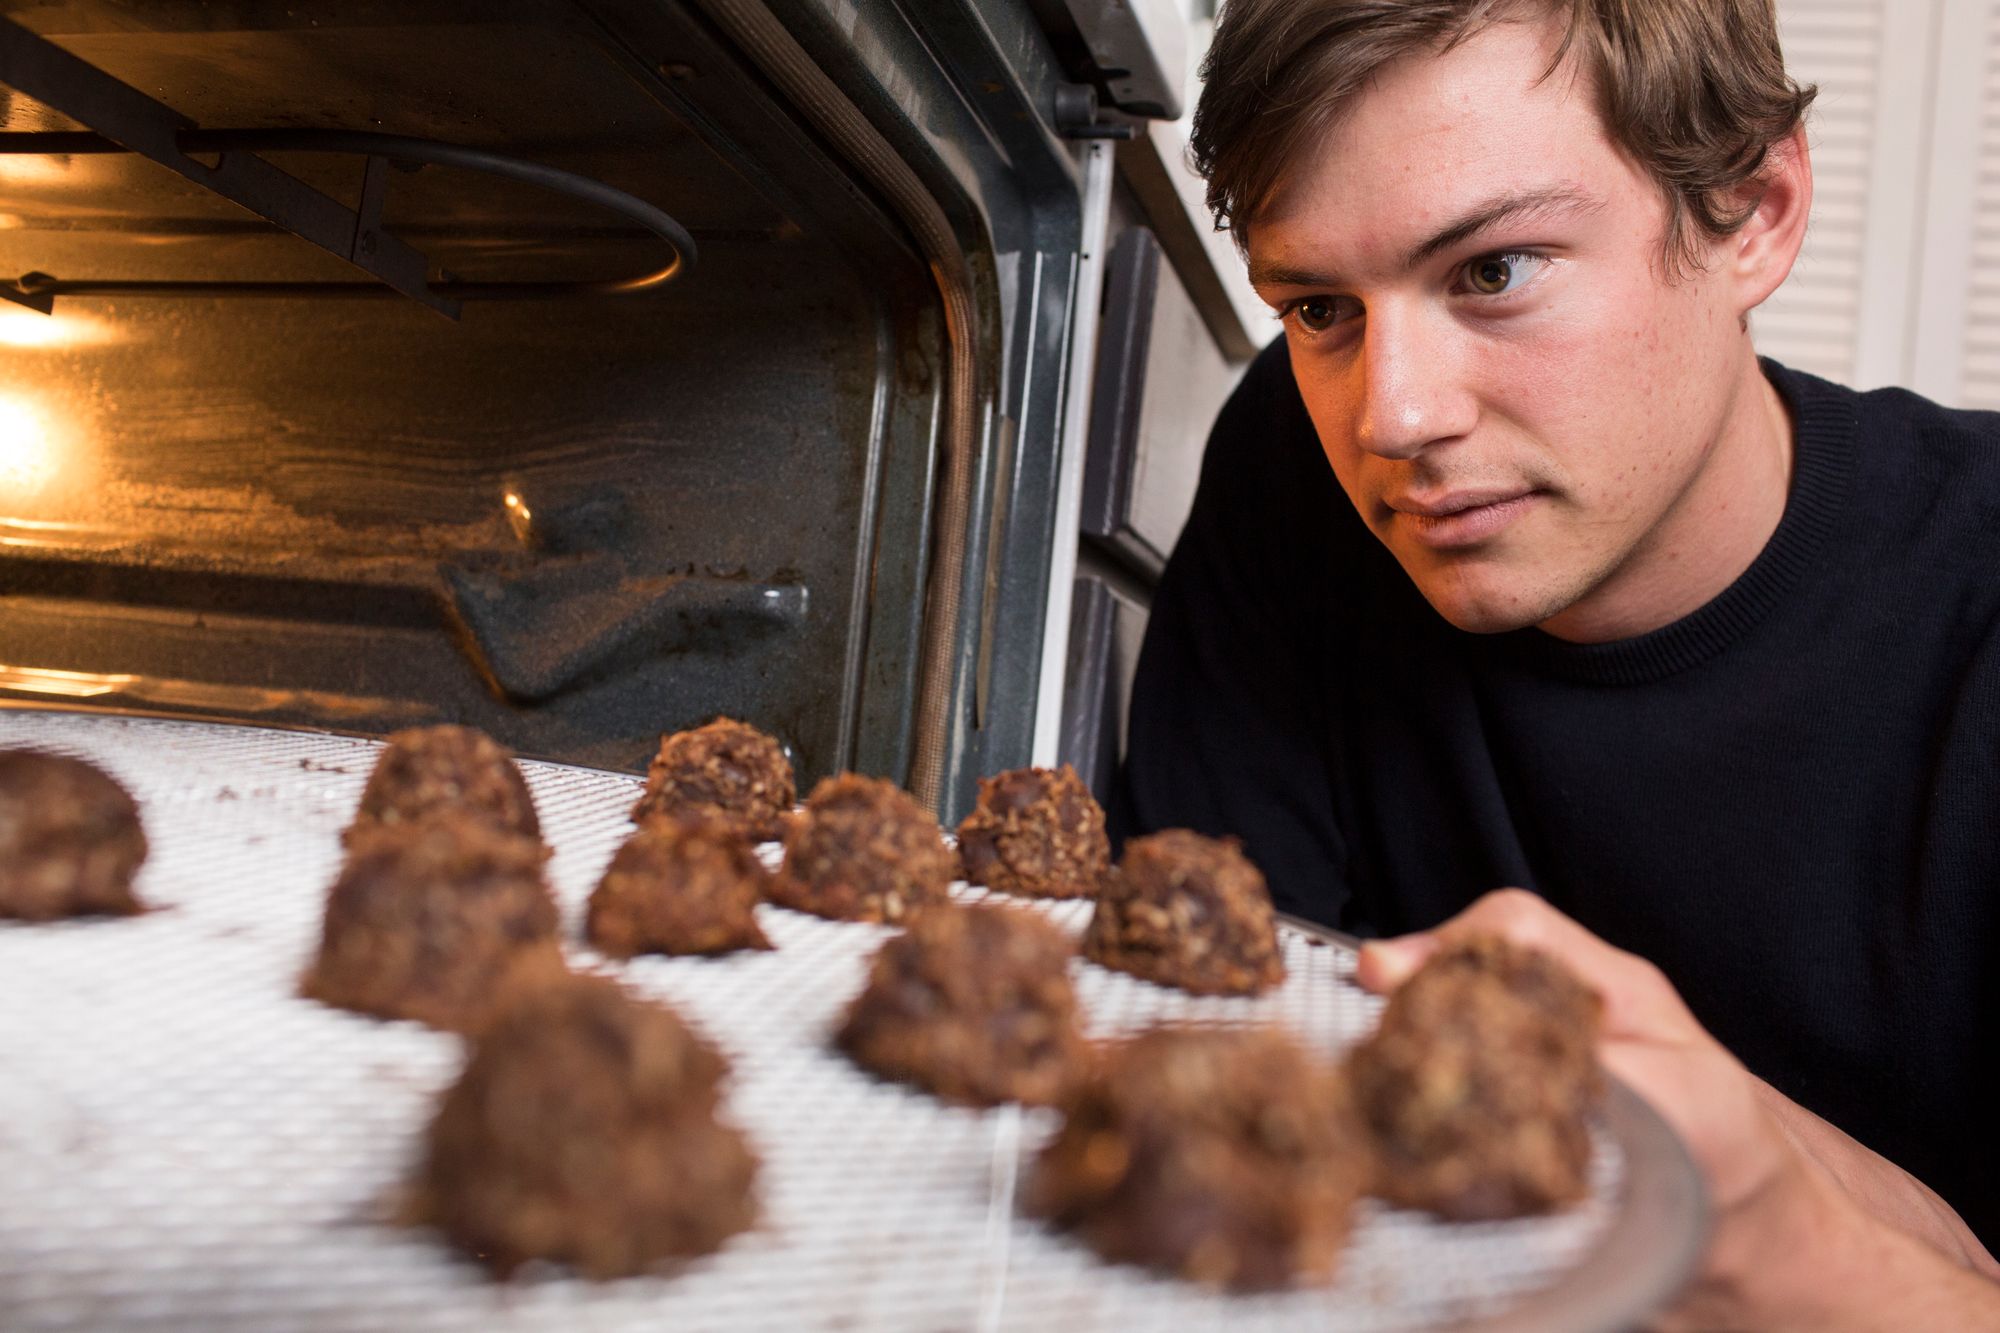 Tommy Brown looks at his energy bars in the oven.